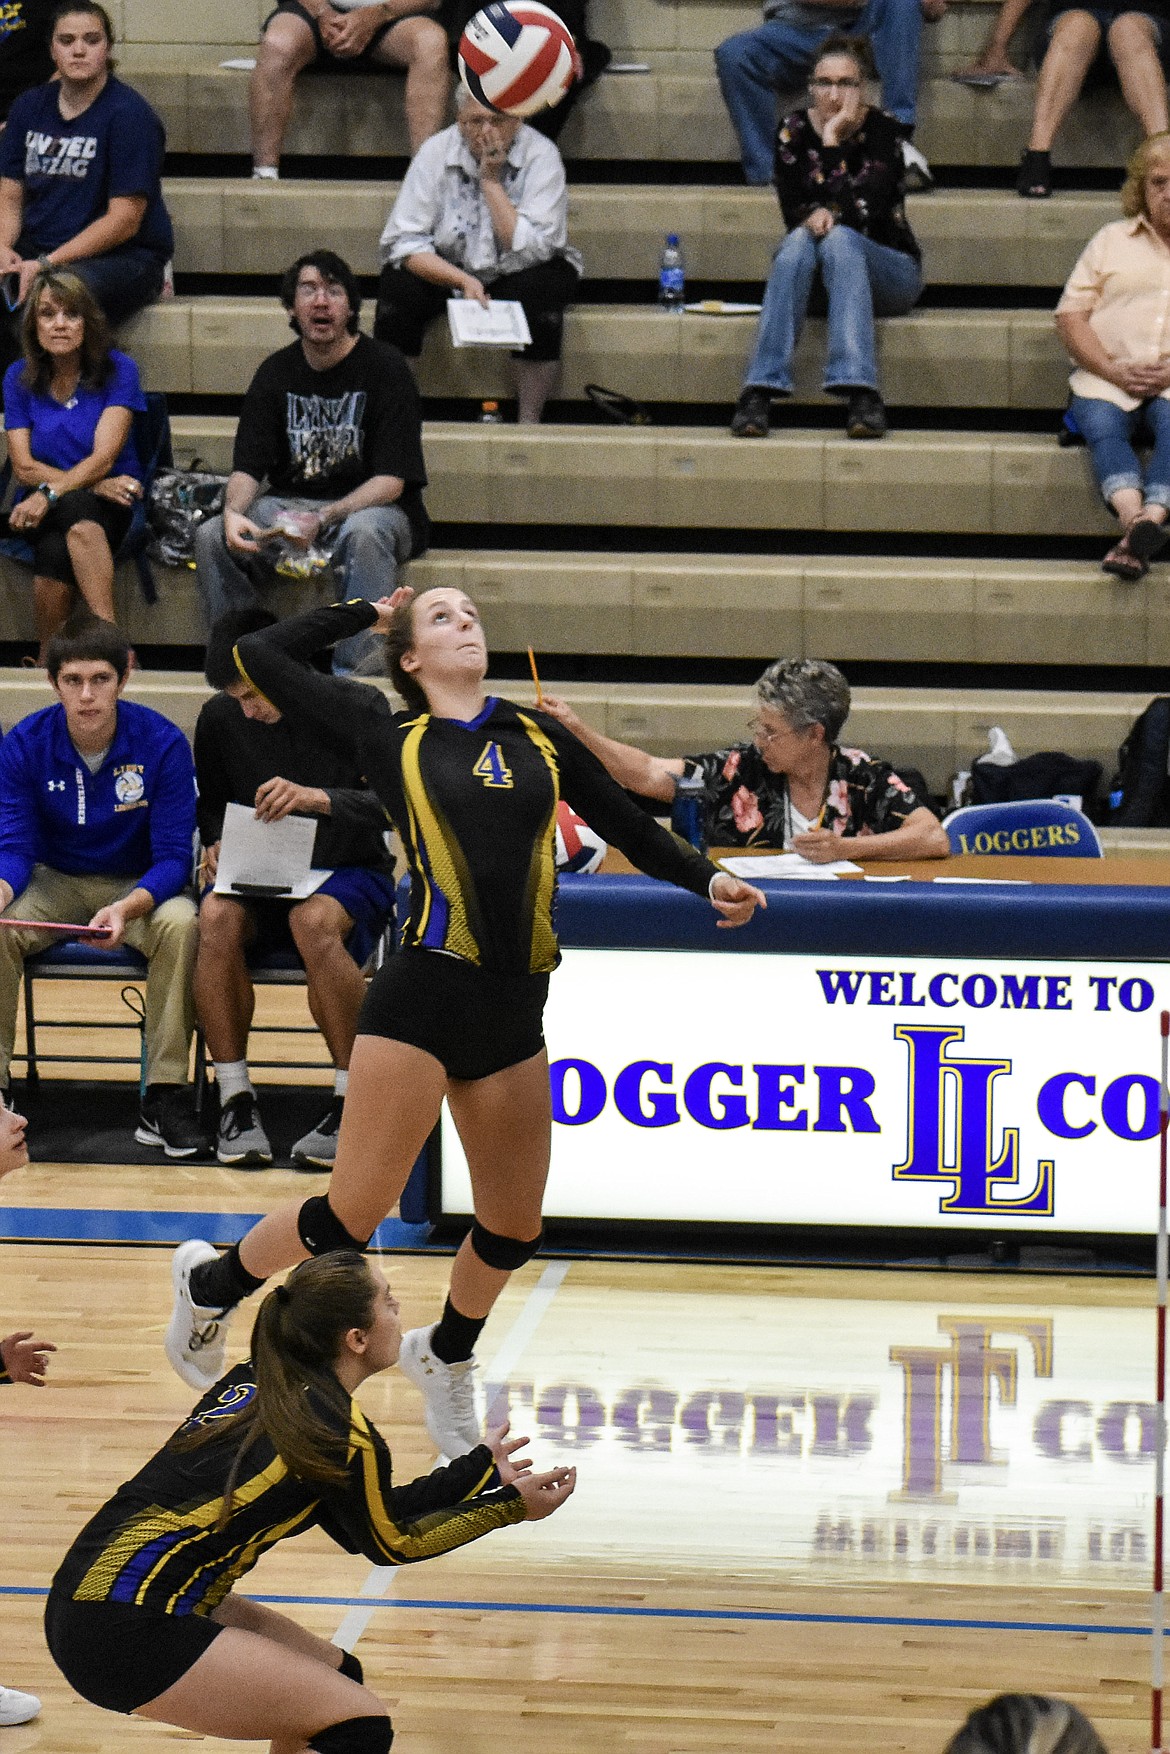 Libby senior Jayden Winslow prepares to score the first point of the match against Polson Saturday with a kill. (Ben Kibbey/The Western News)